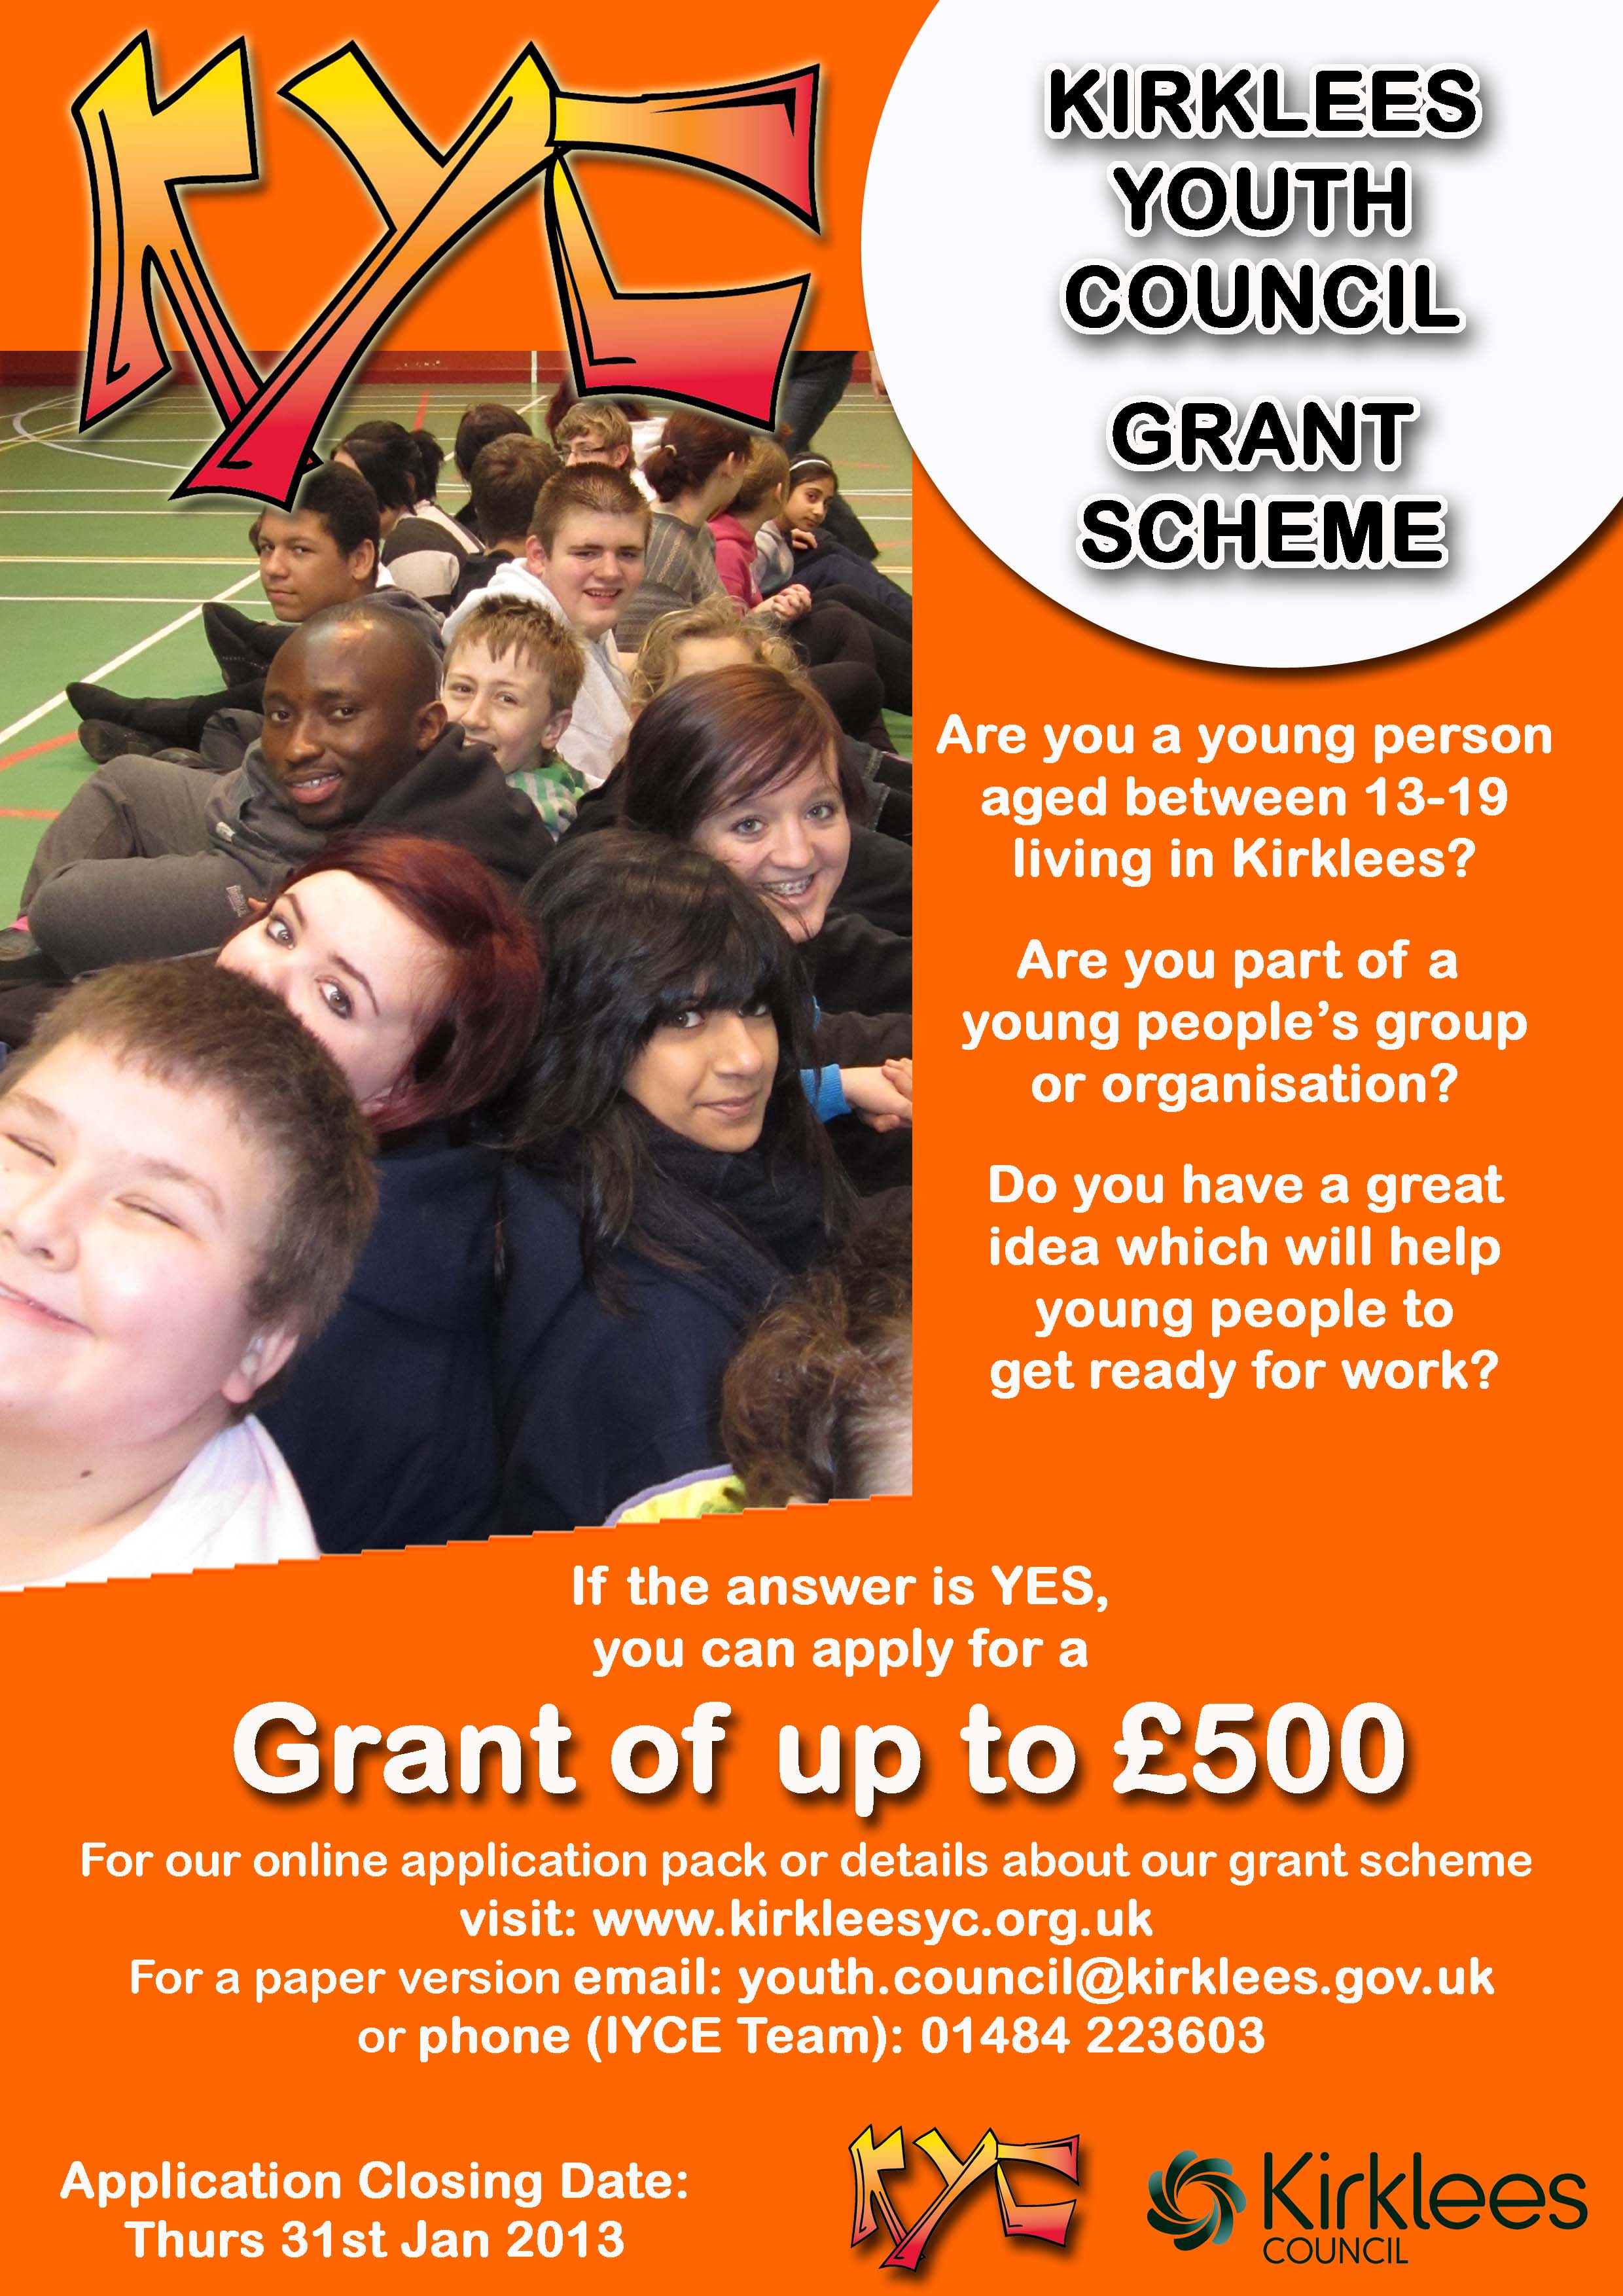 A funding opportunity for young people aged 13-19 years in Kirklees